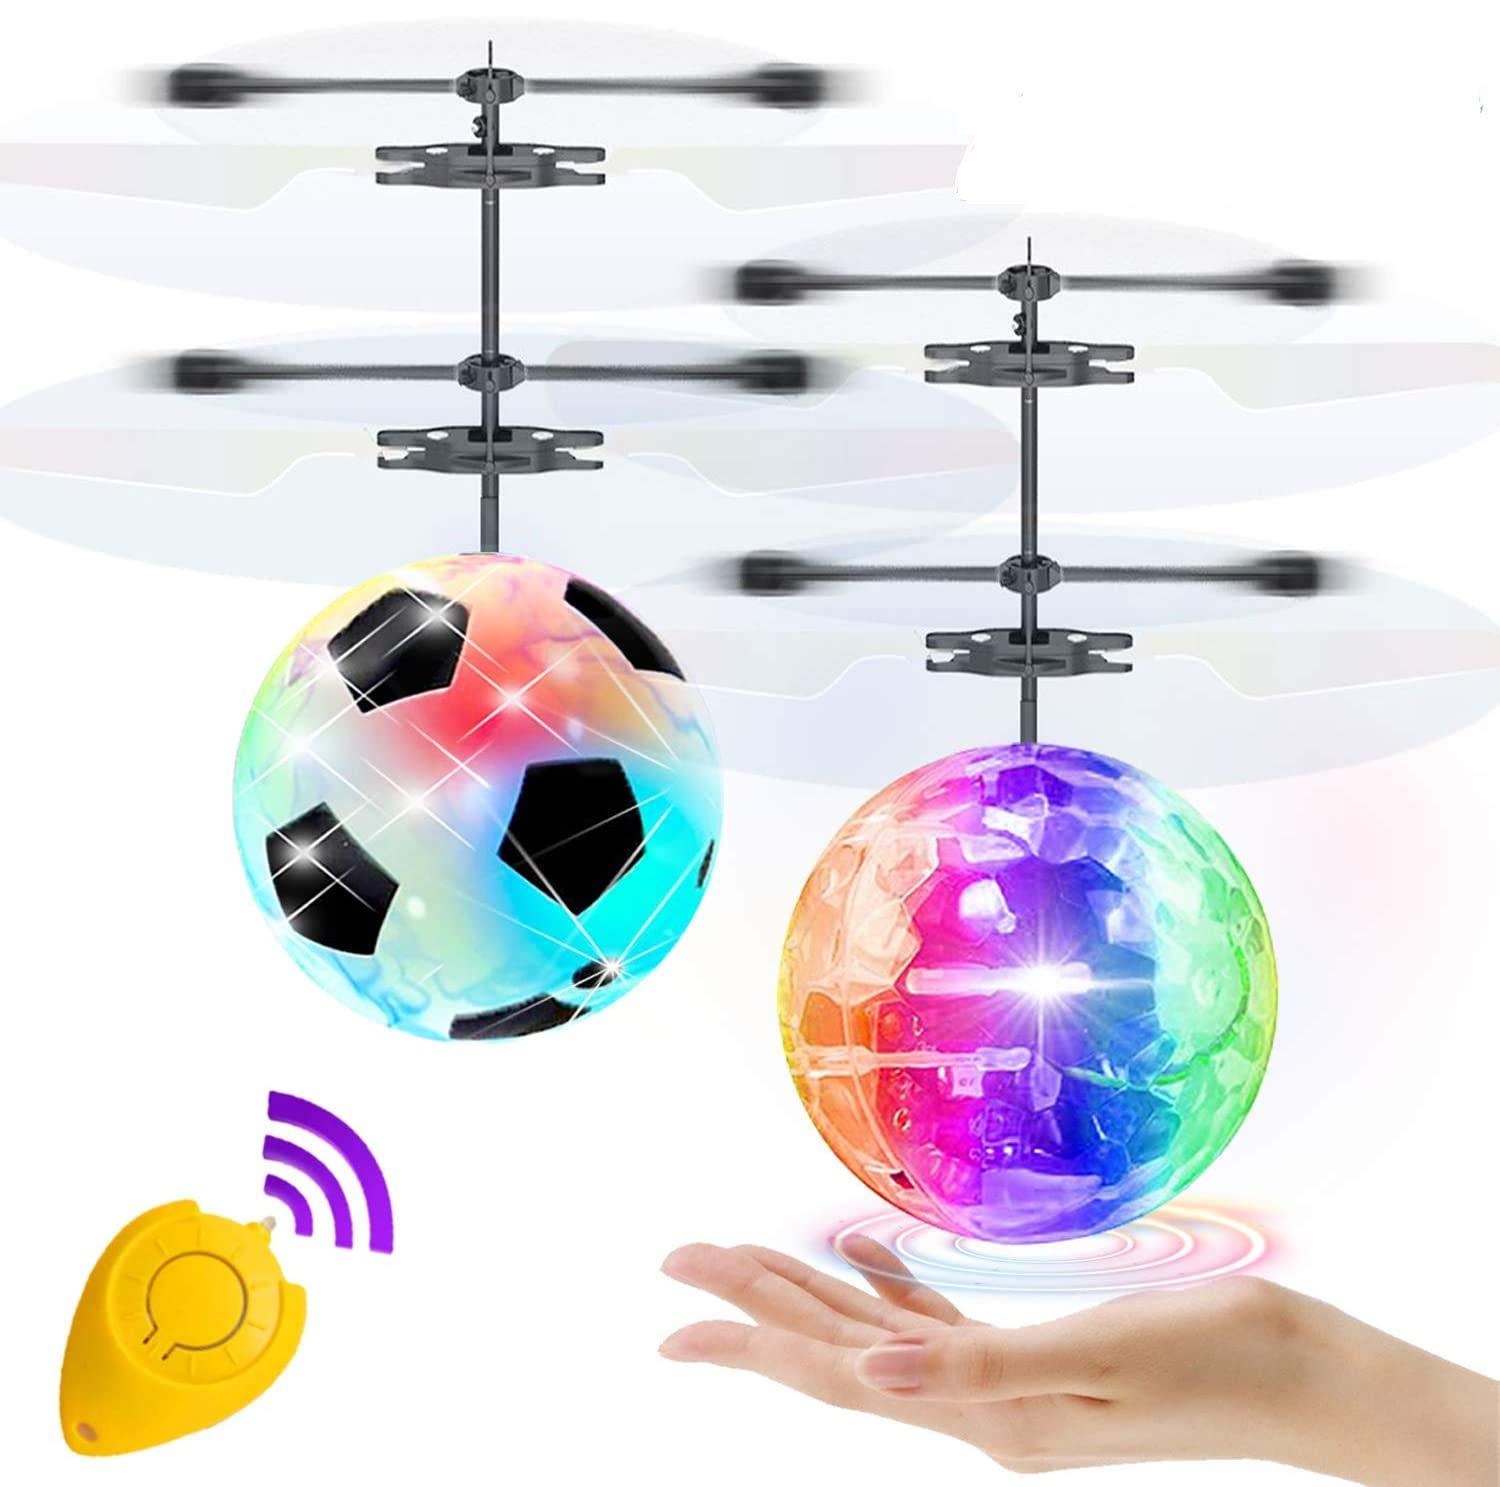 Induction Flying Ball Remote Control: Convenient and Safe Induction Flying Ball Remote Control